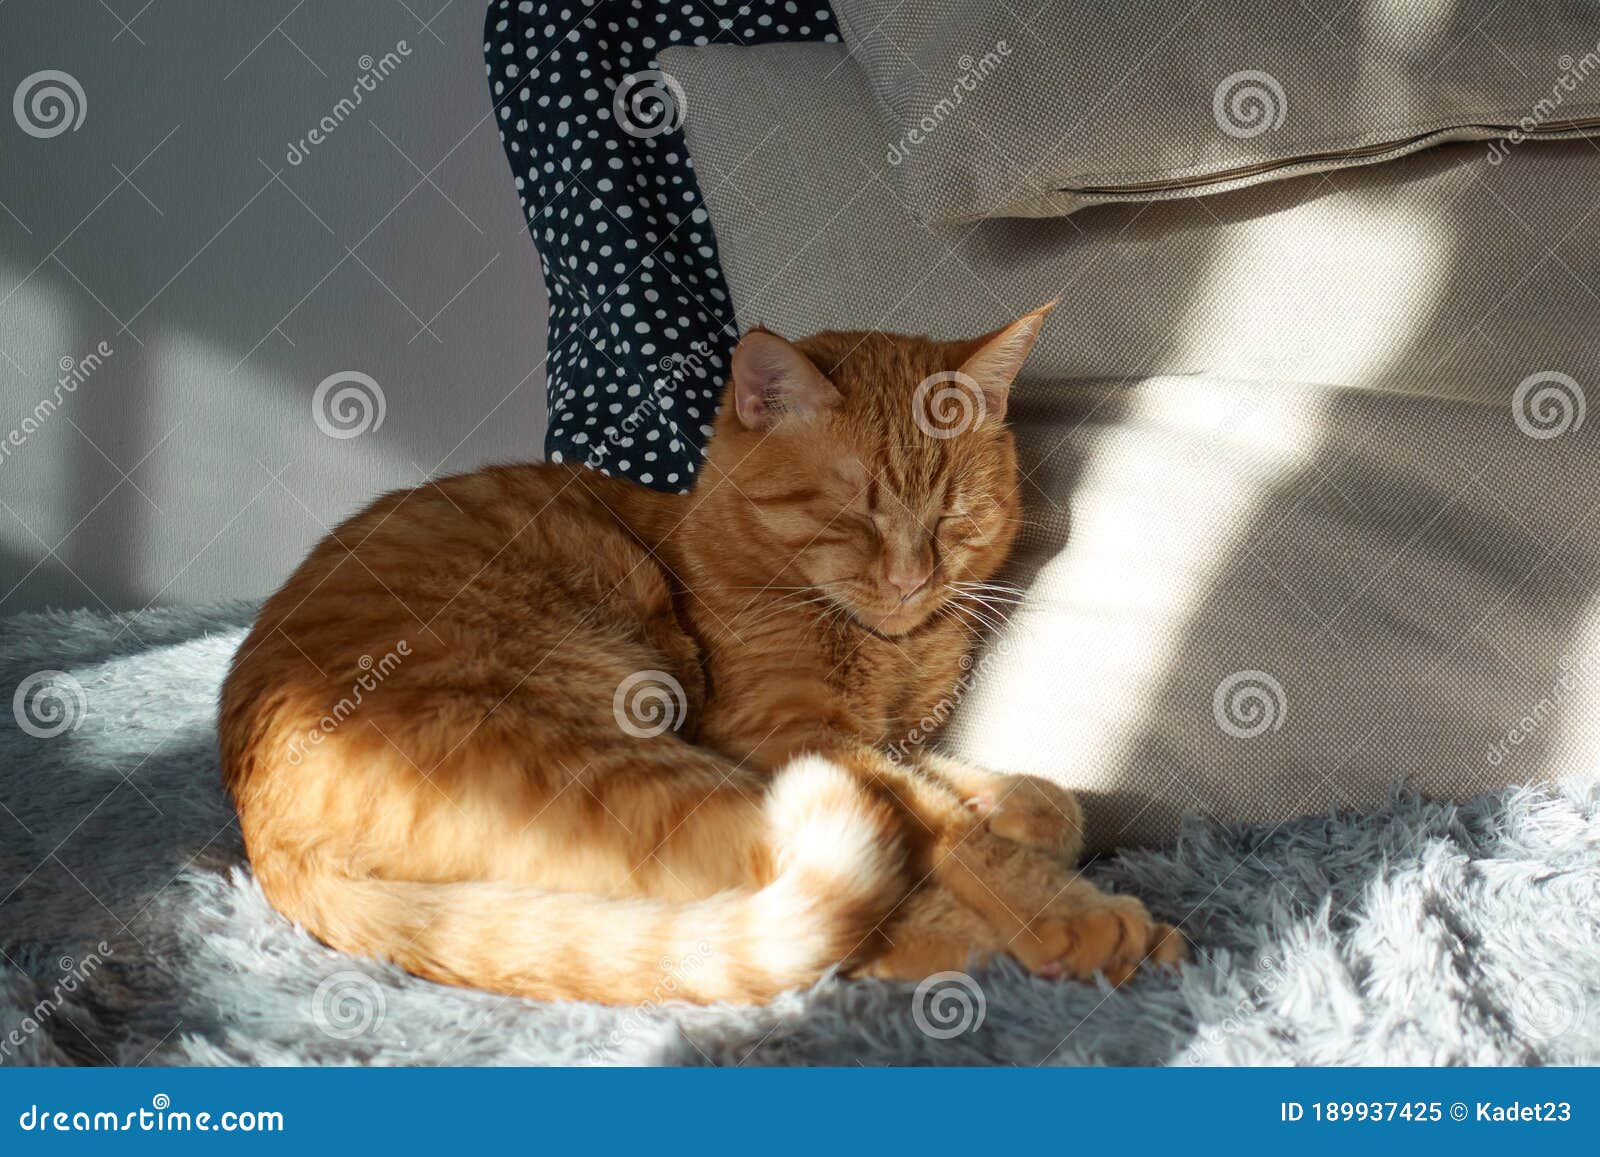 Red Cat Sleeping on Grey Bed and Pillows Stock Image - Image of color ...